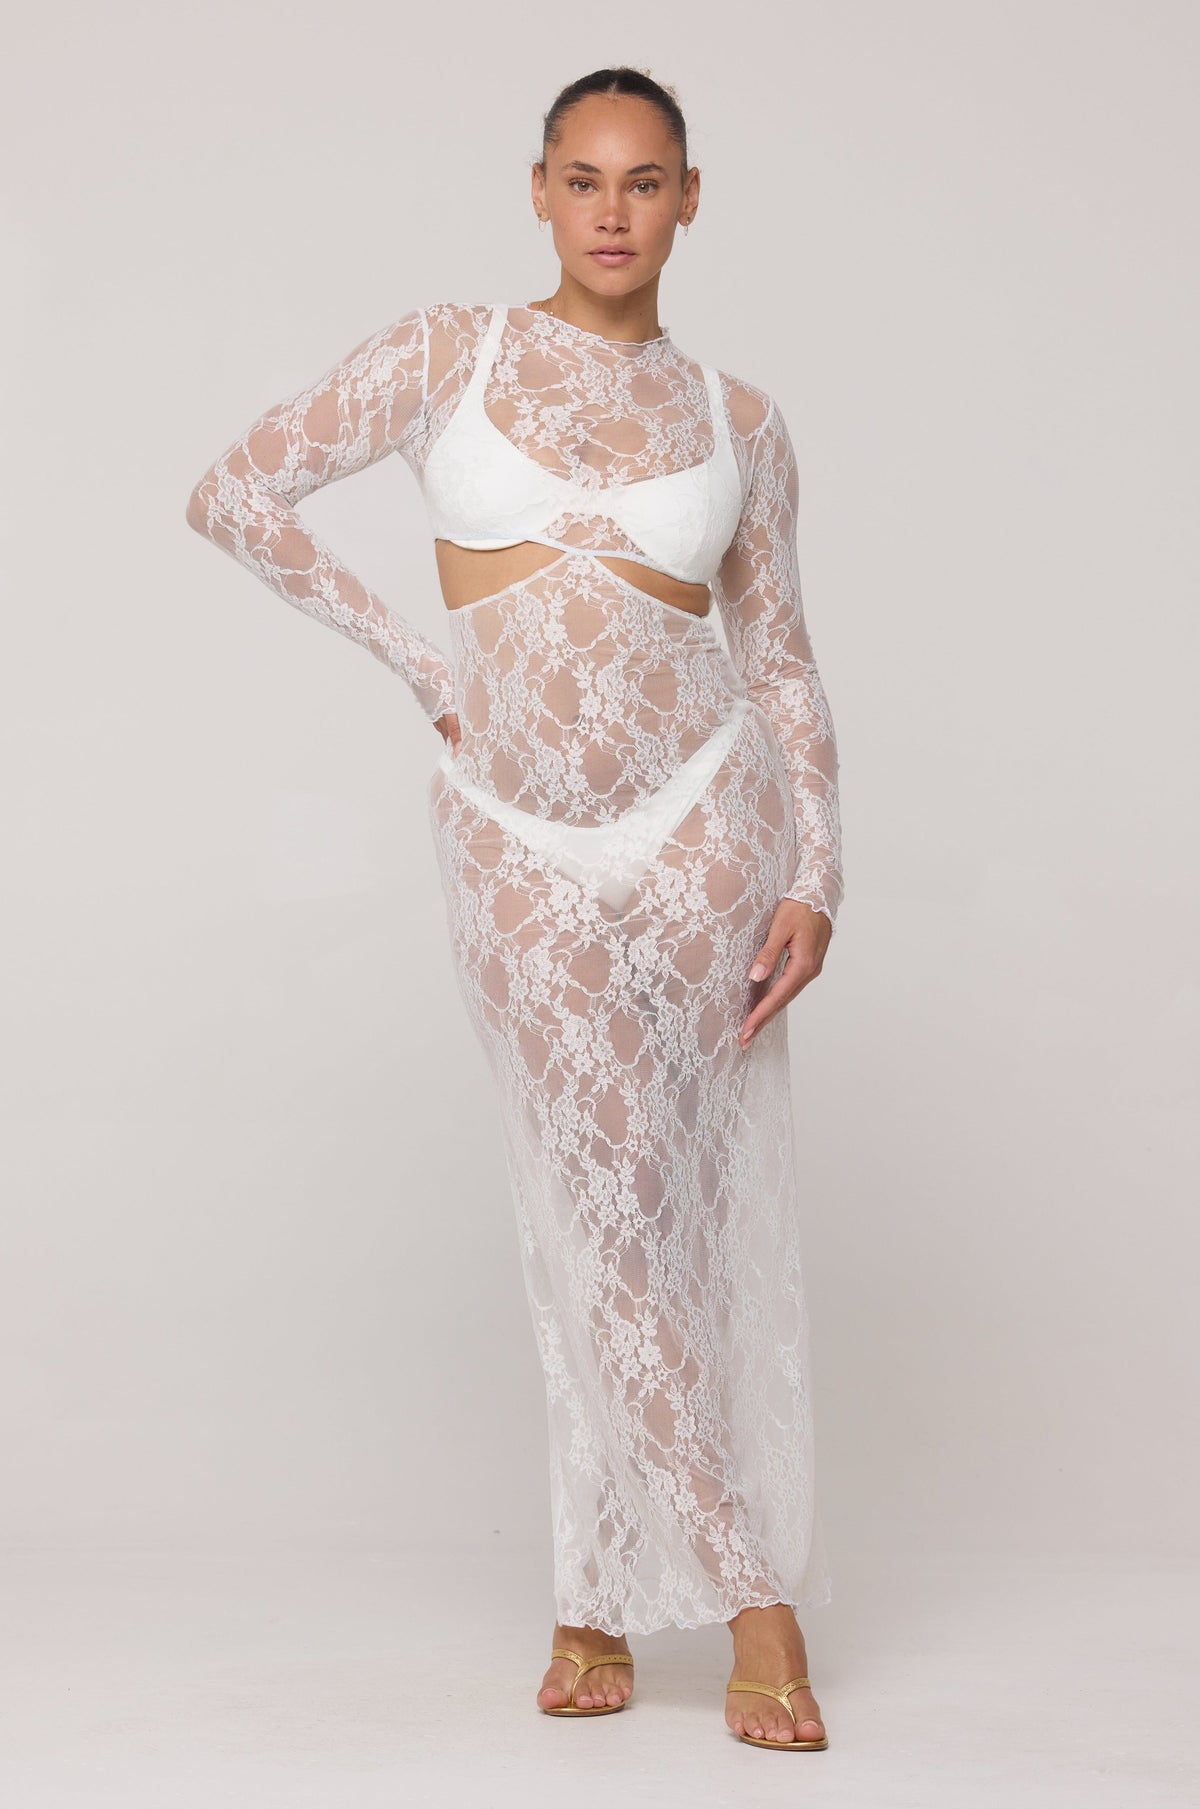 This is an image of Audrey Lace Dress in White Lace - RESA featuring a model wearing the dress